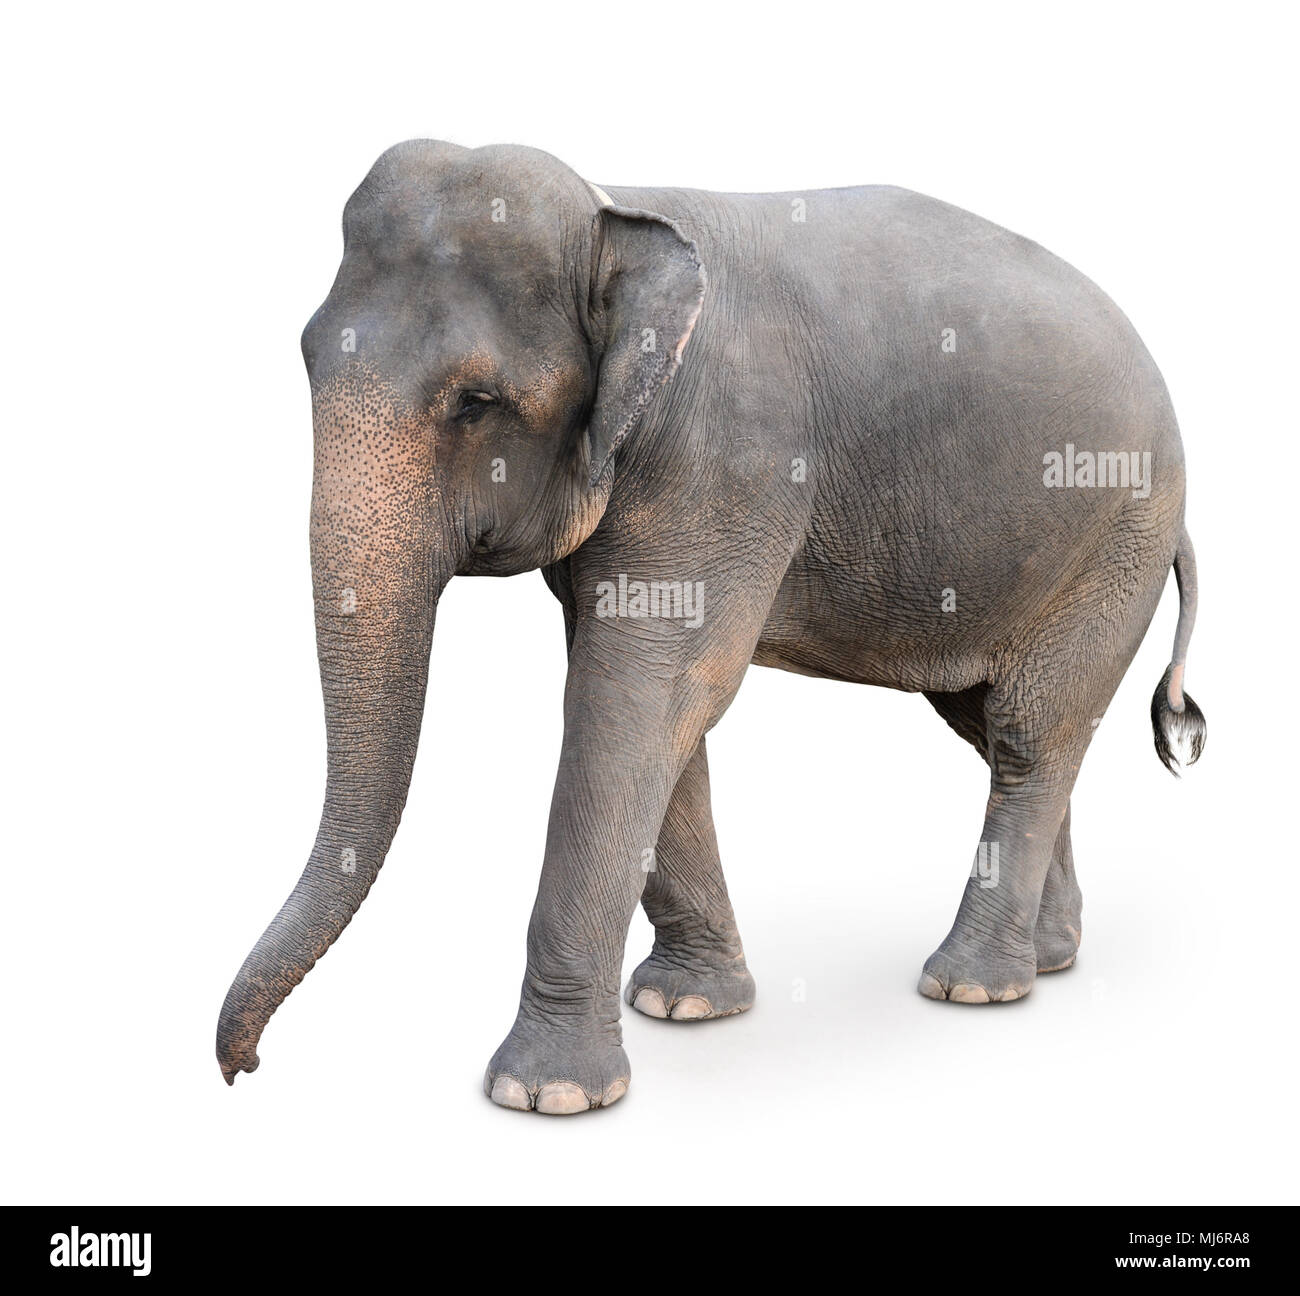 Indian elephant isolated on white Banque D'Images